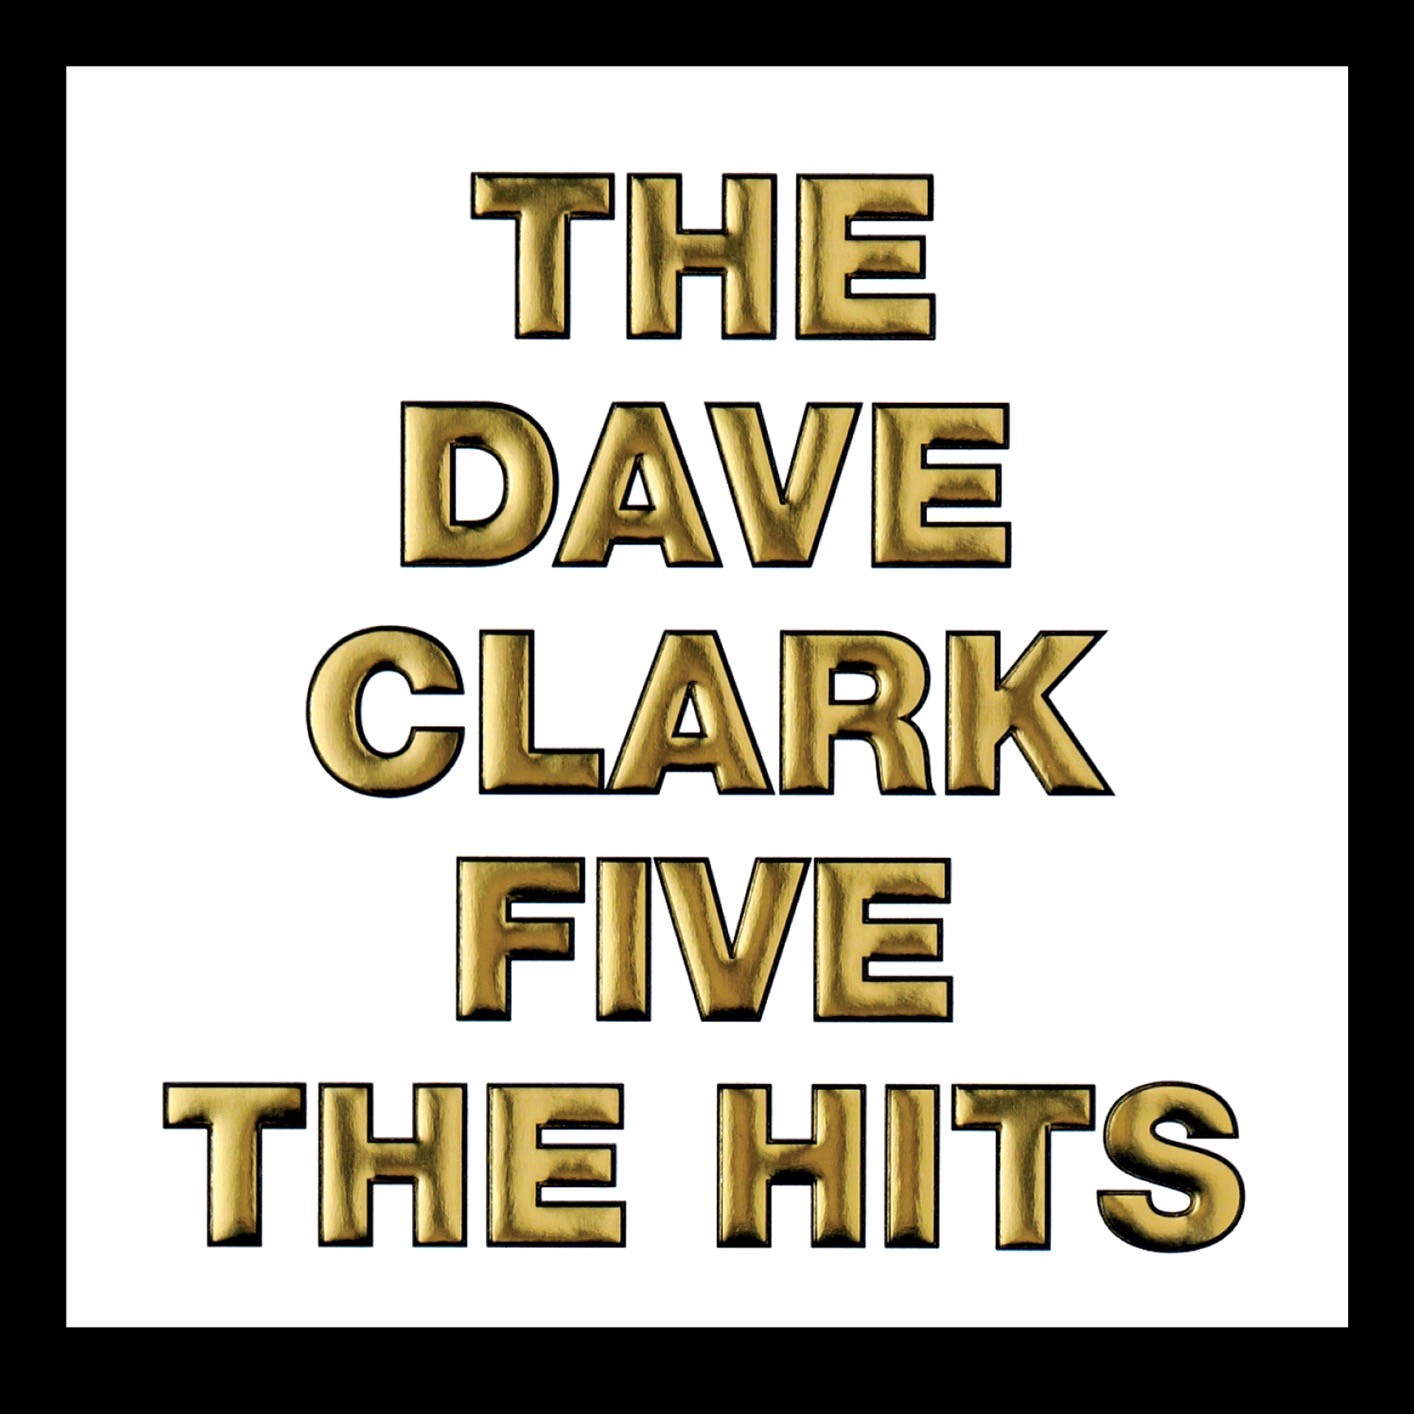 The Dave Clark Five – The Hits (Remastered) (2019) [FLAC 24bit/96kHz]